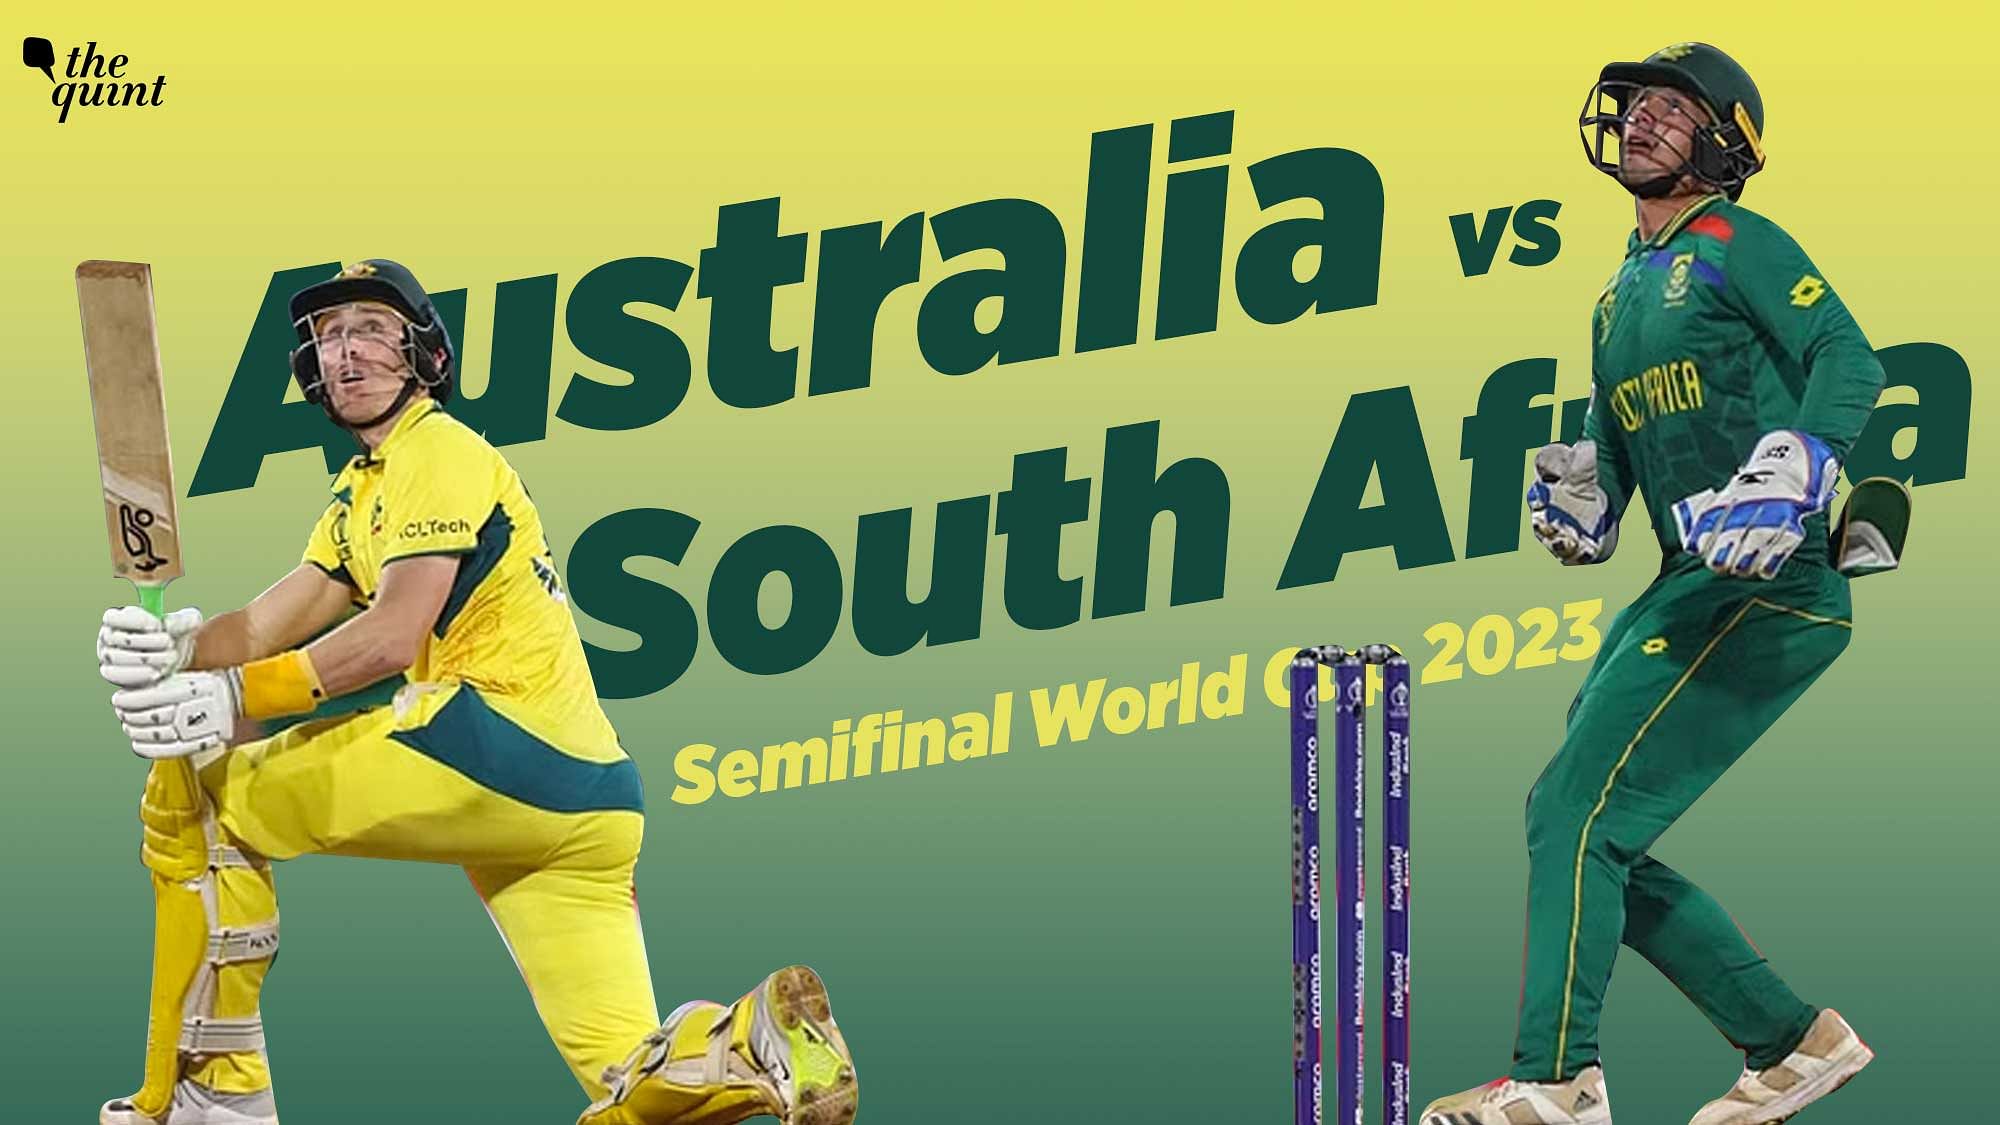 AUS vs SA Semi-final Cricket World Cup 2023 Live Streaming Australia vs South Africa, When and Where To Watch Live Telecast on TV?